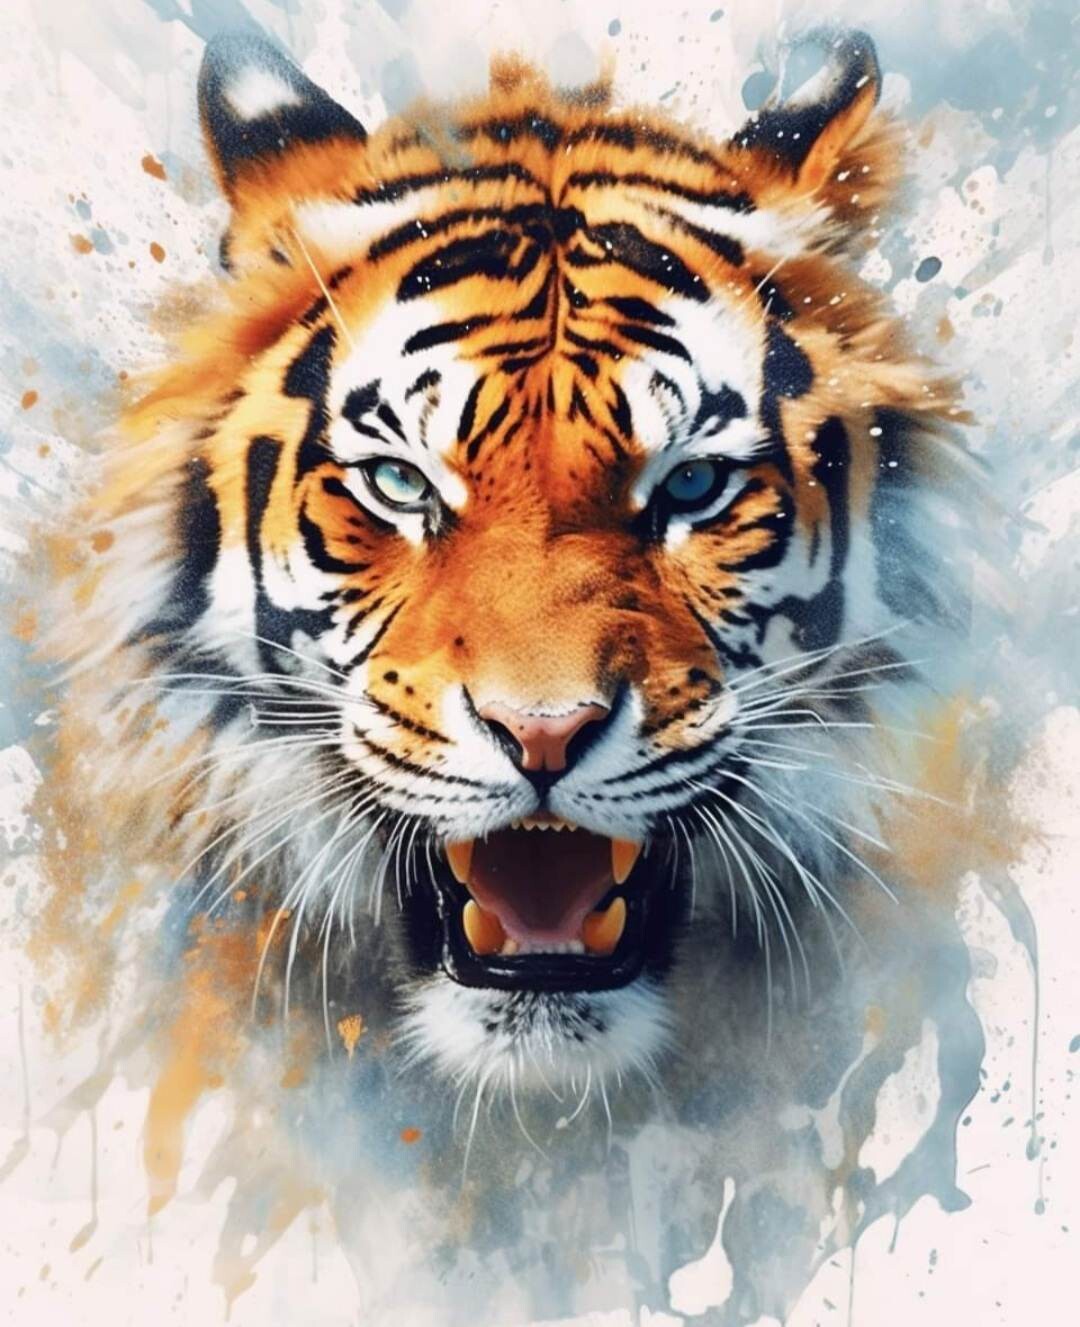 TIGER - 50 x 70cm - Full Drill (round), POURED GLUE - Diamond Painting Kit - Currently in stock